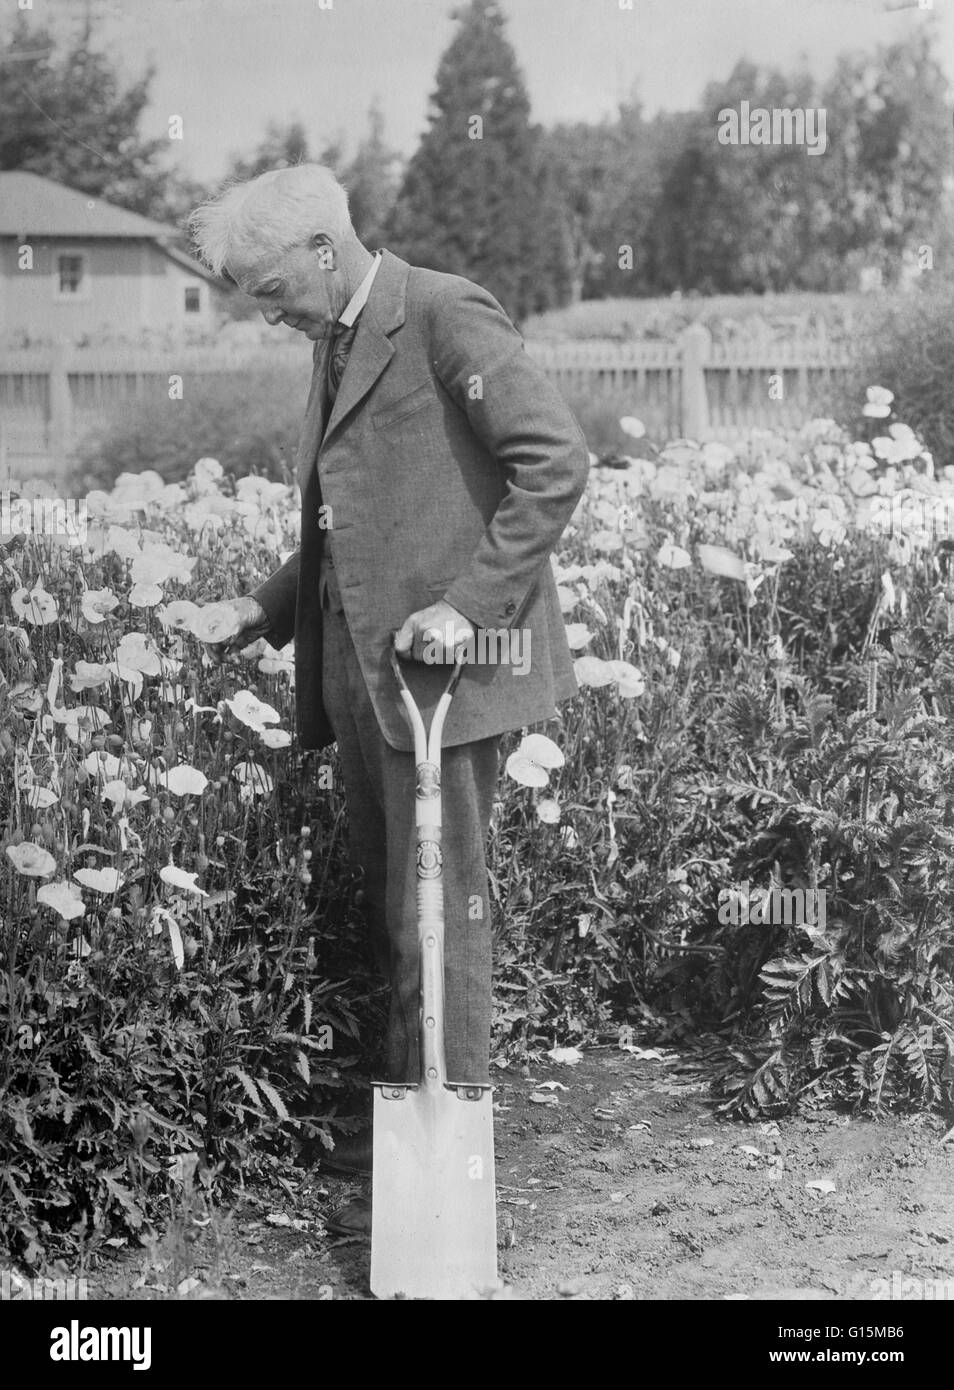 Luther Burbank (March 7, 1849 - April 11, 1926) was an American botanist, horticulturist and a pioneer in agricultural science. He developed more than 800 strains and varieties of plants over his 55-year career. Burbank's varied creations included fruits, Stock Photo